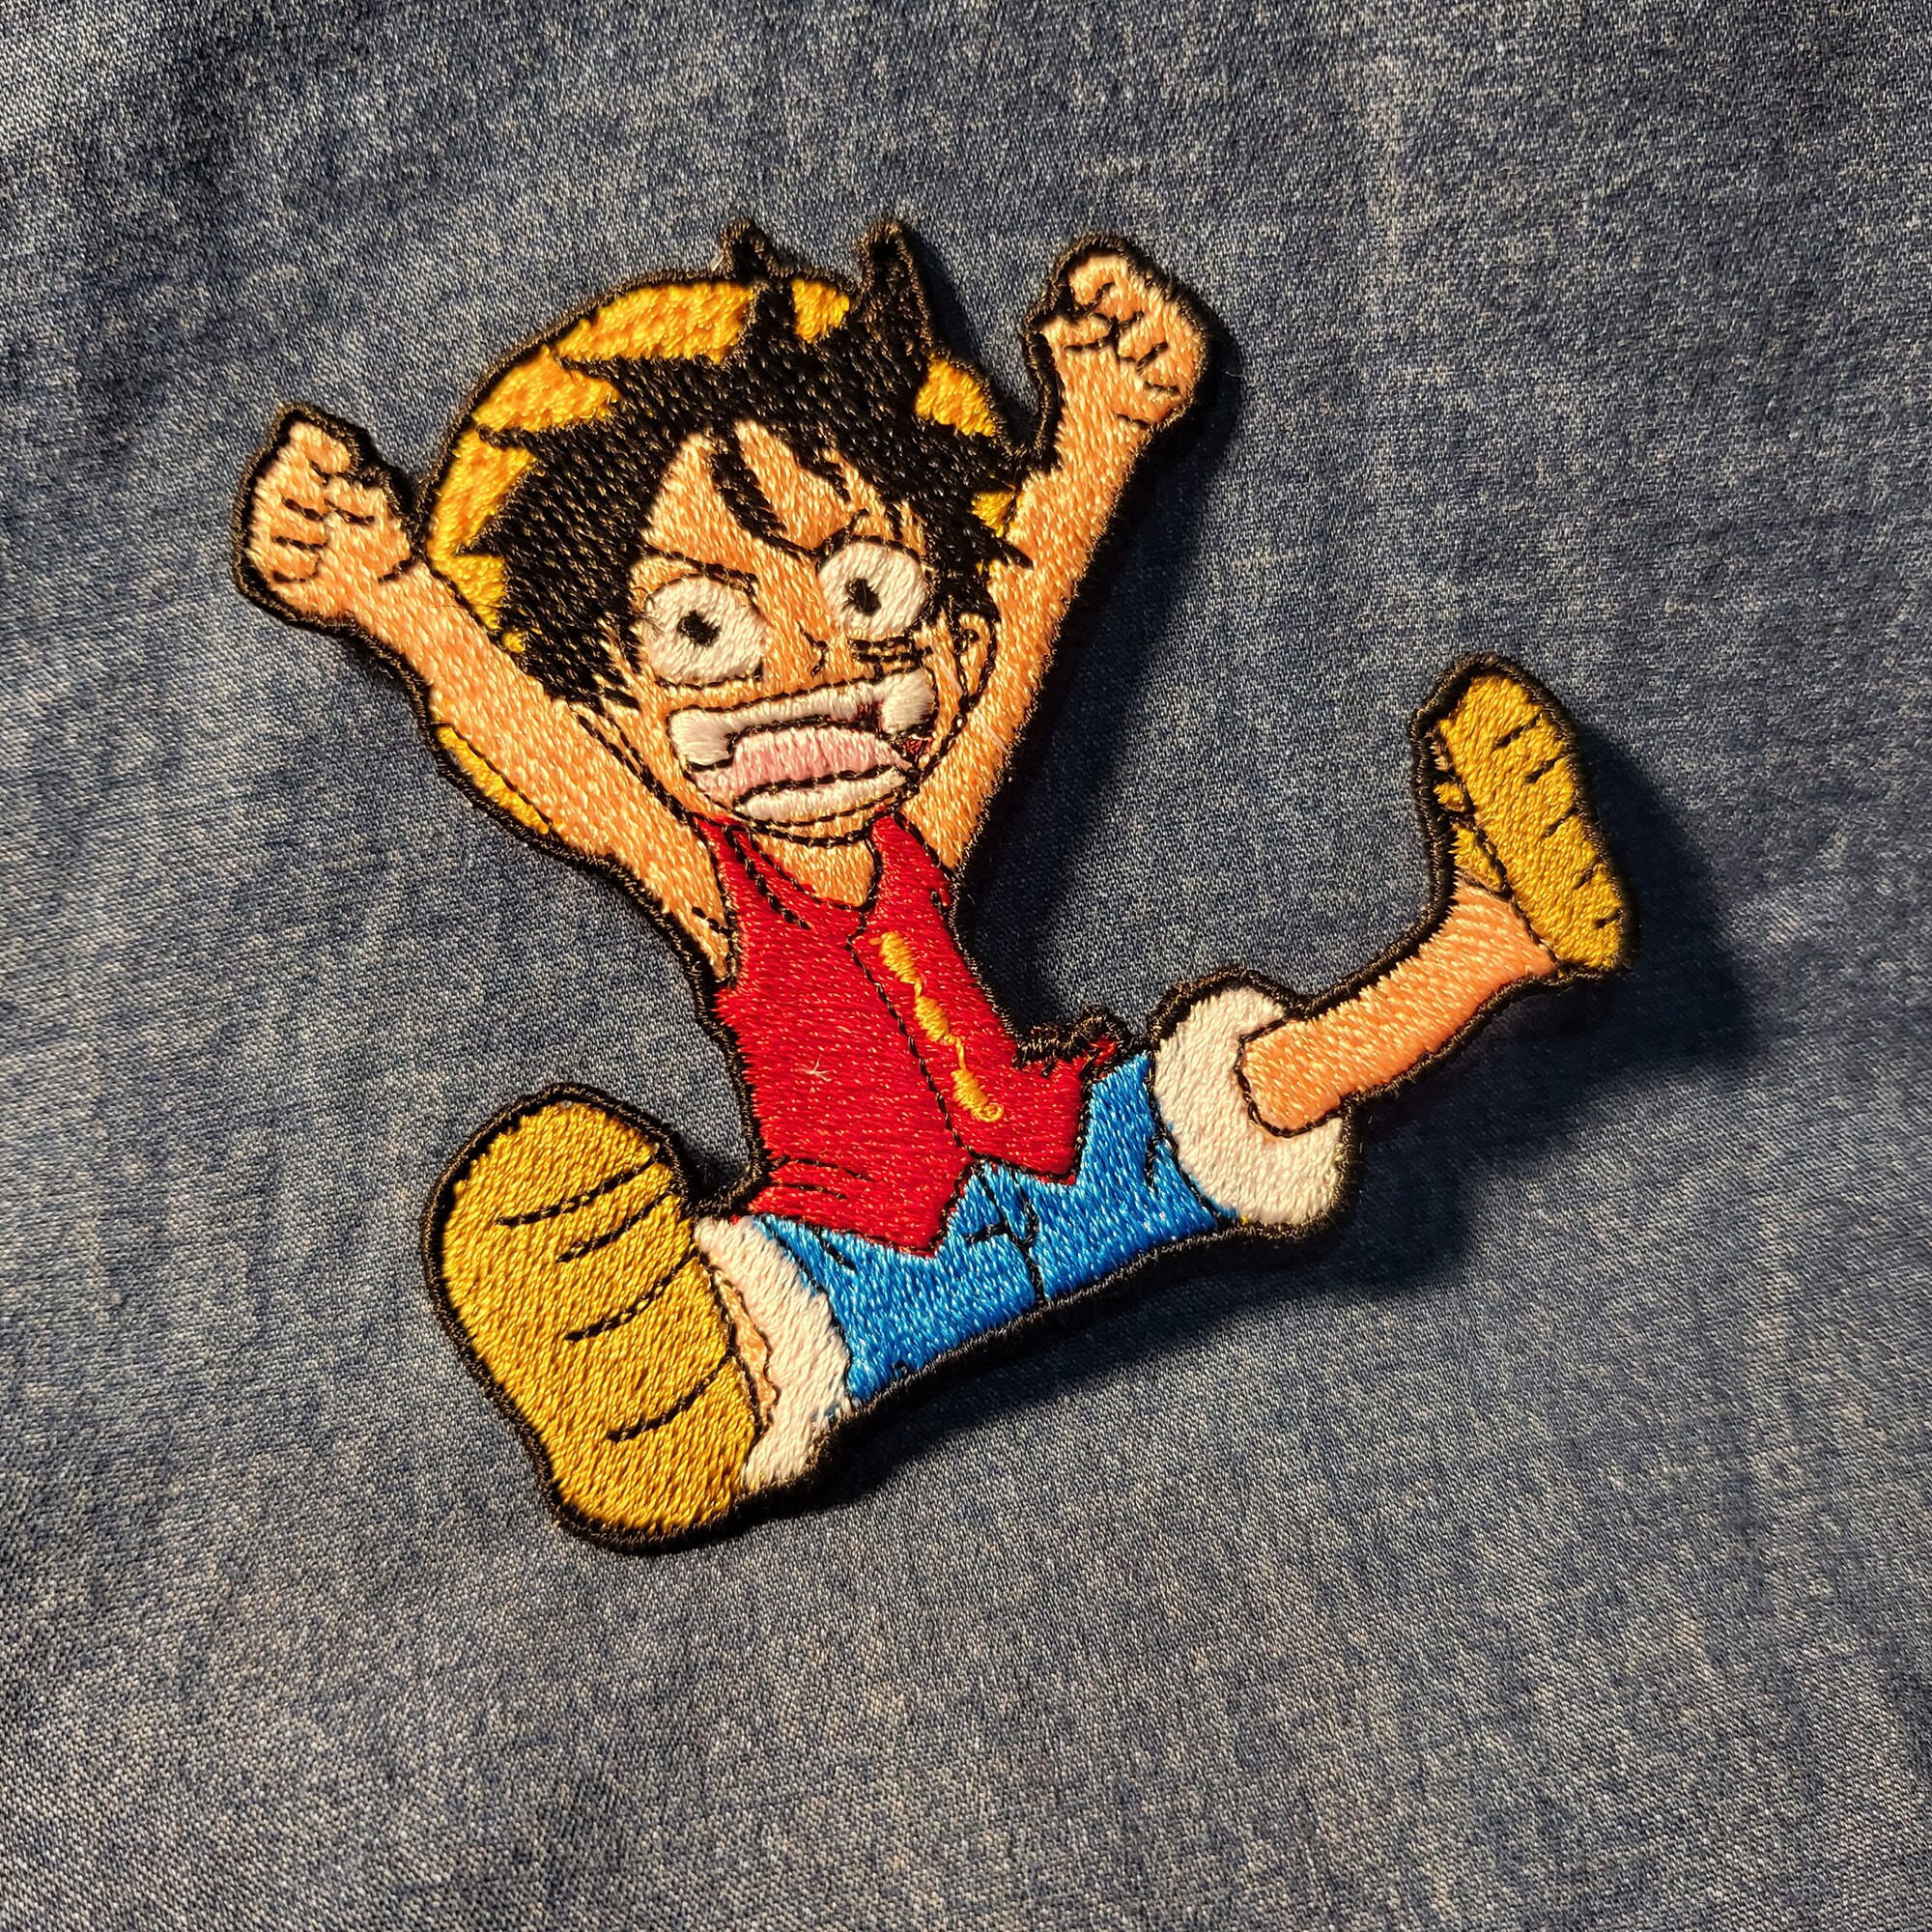  OYSTERBOY One Piece Luffy Thread Hook and Loop Backed  Decorative Applique Embriodered Patch (Going Merry GO Sheep Ship) :  Clothing, Shoes & Jewelry